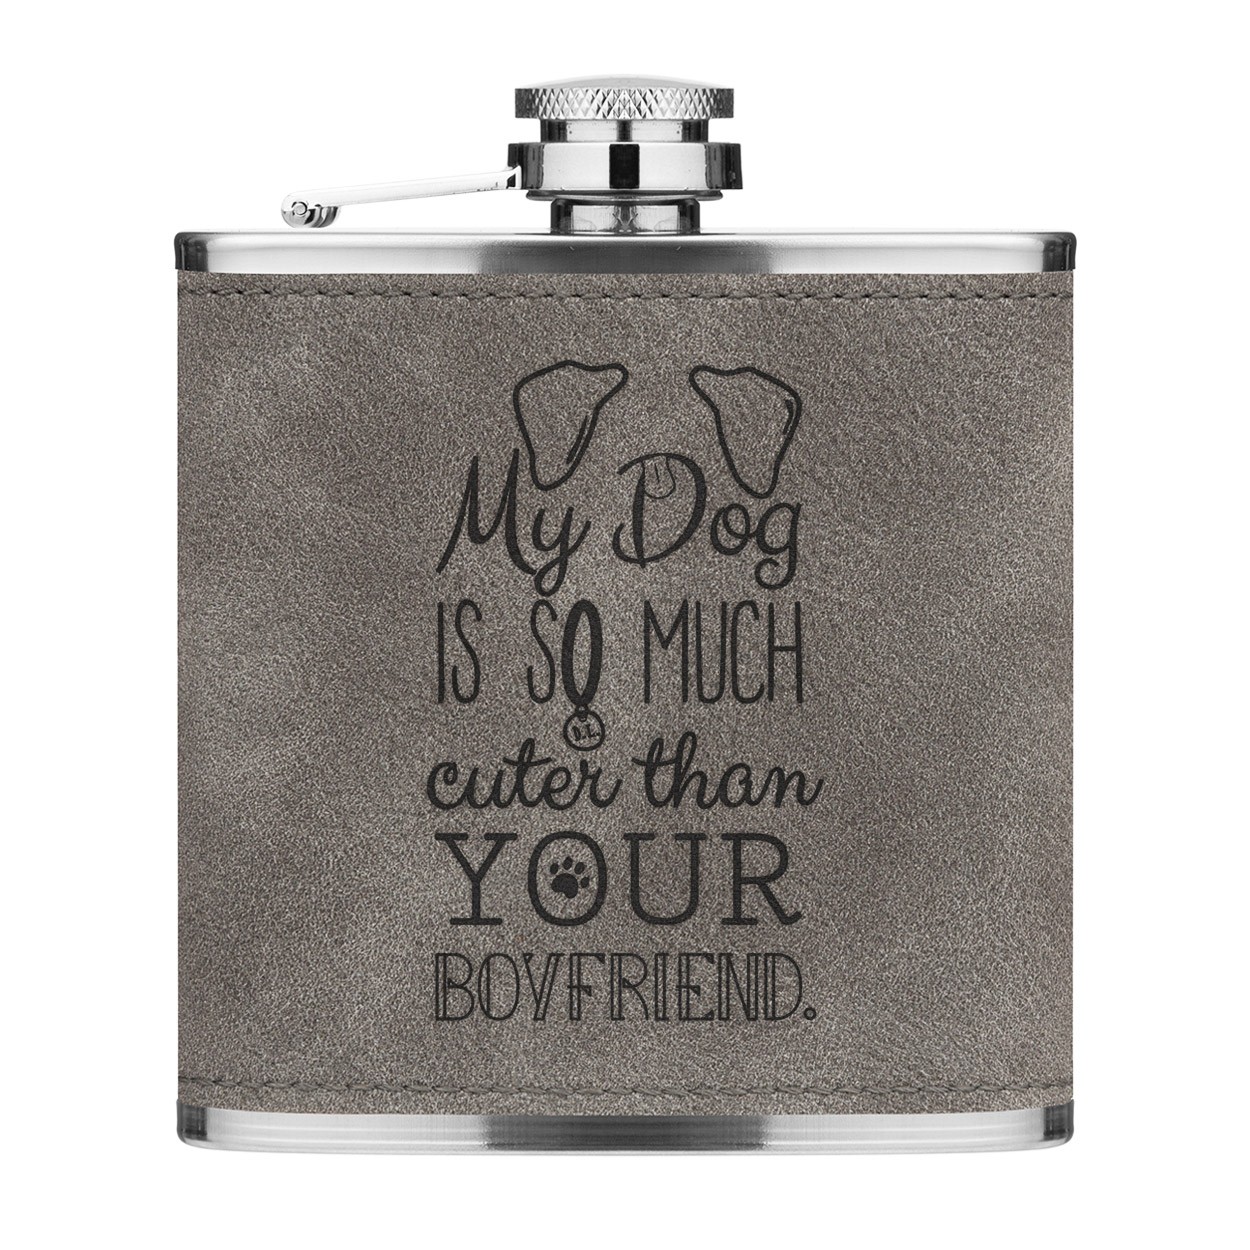 My Dog Is Cuter Than Your Boyfriend Brown Ears 6oz PU Leather Hip Flask Grey Luxe